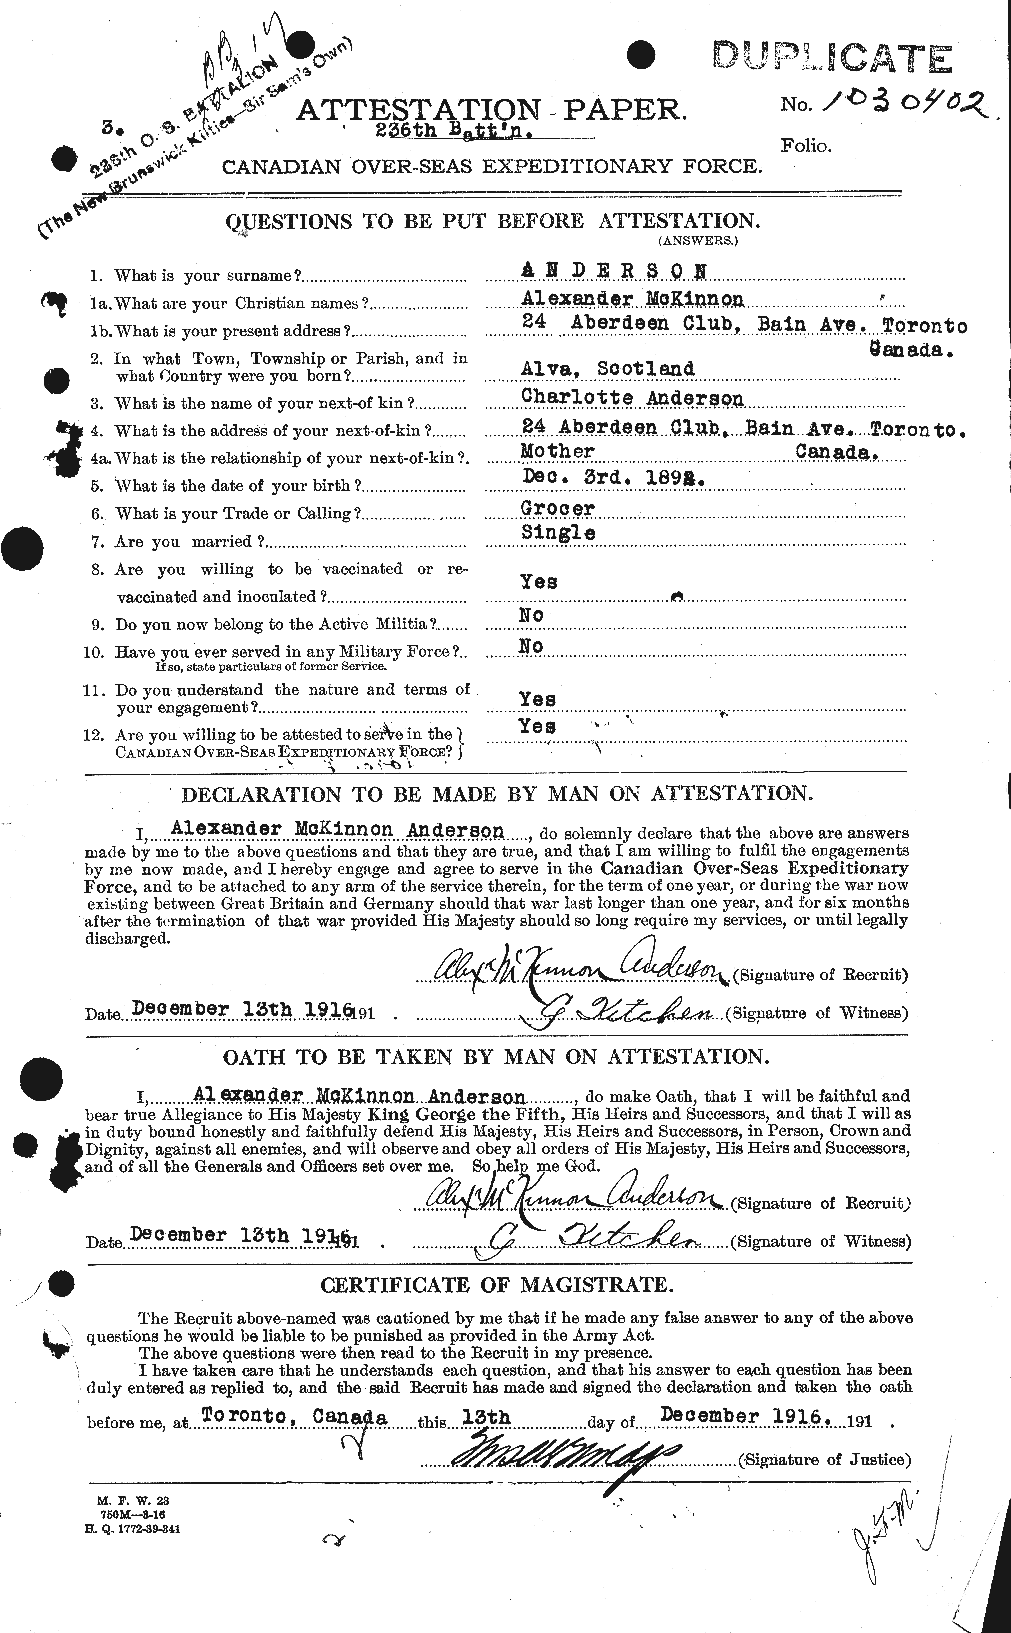 Personnel Records of the First World War - CEF 209478a